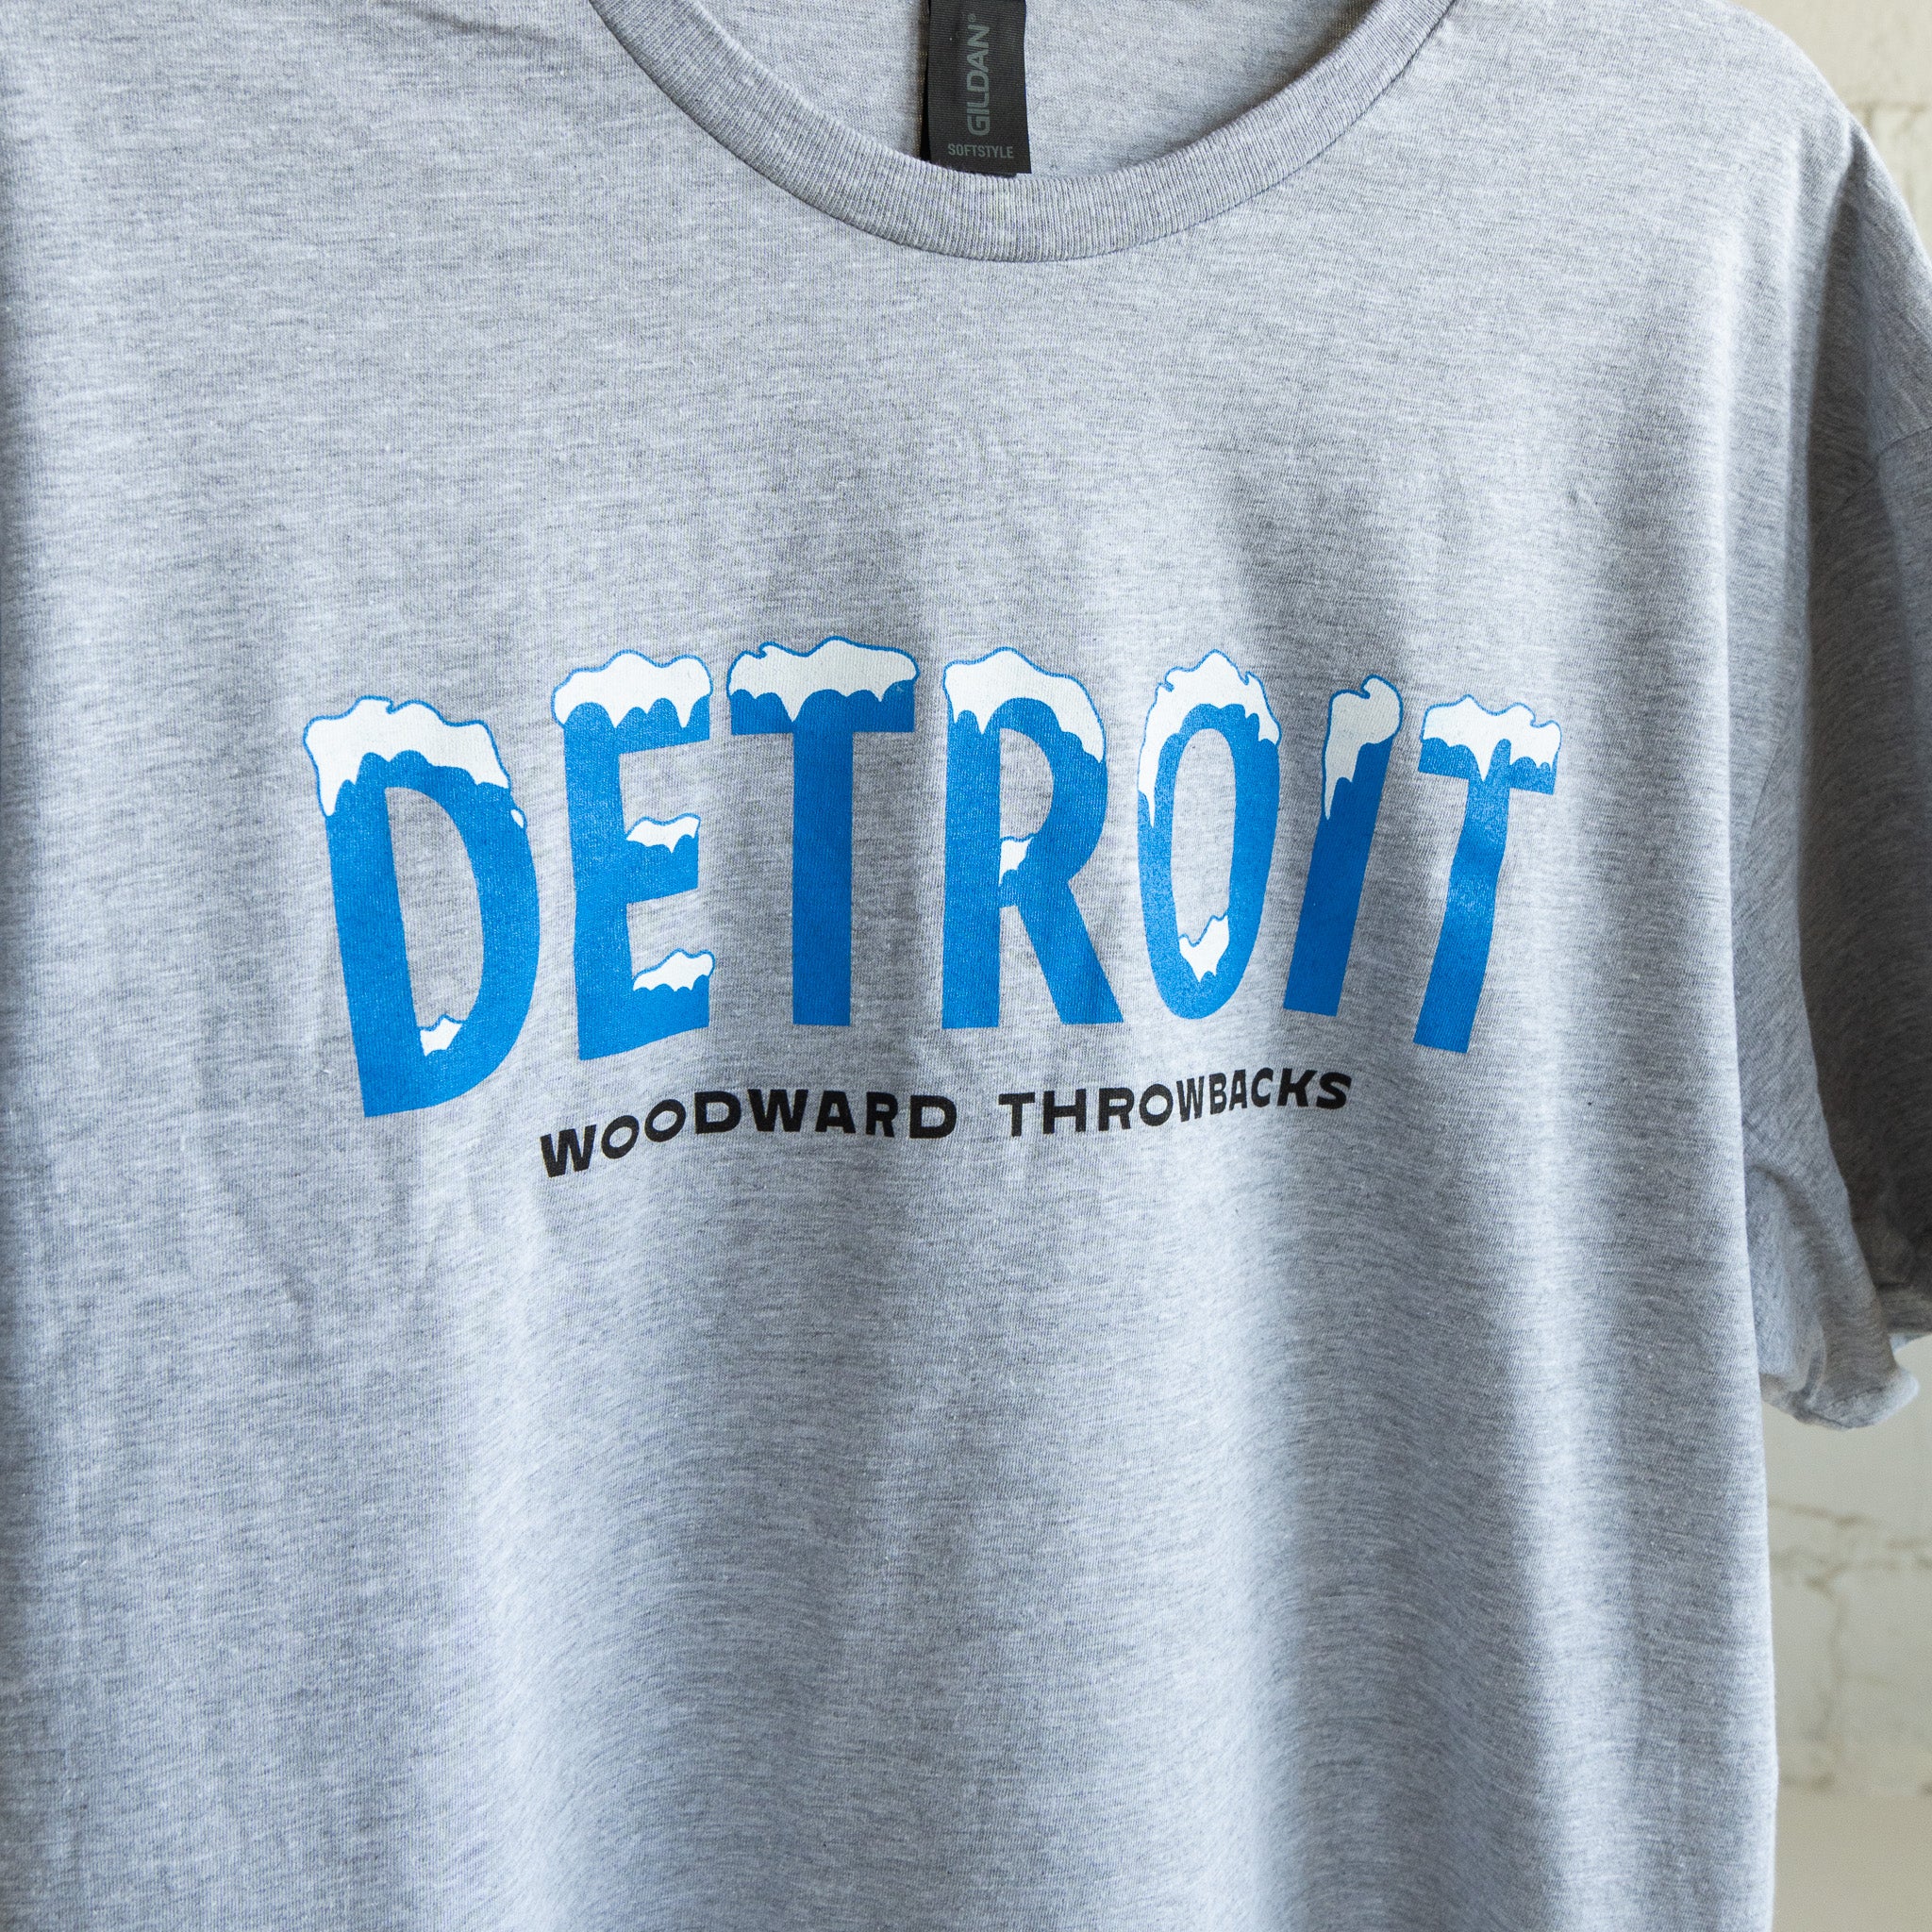 icy Detroit tee close up view